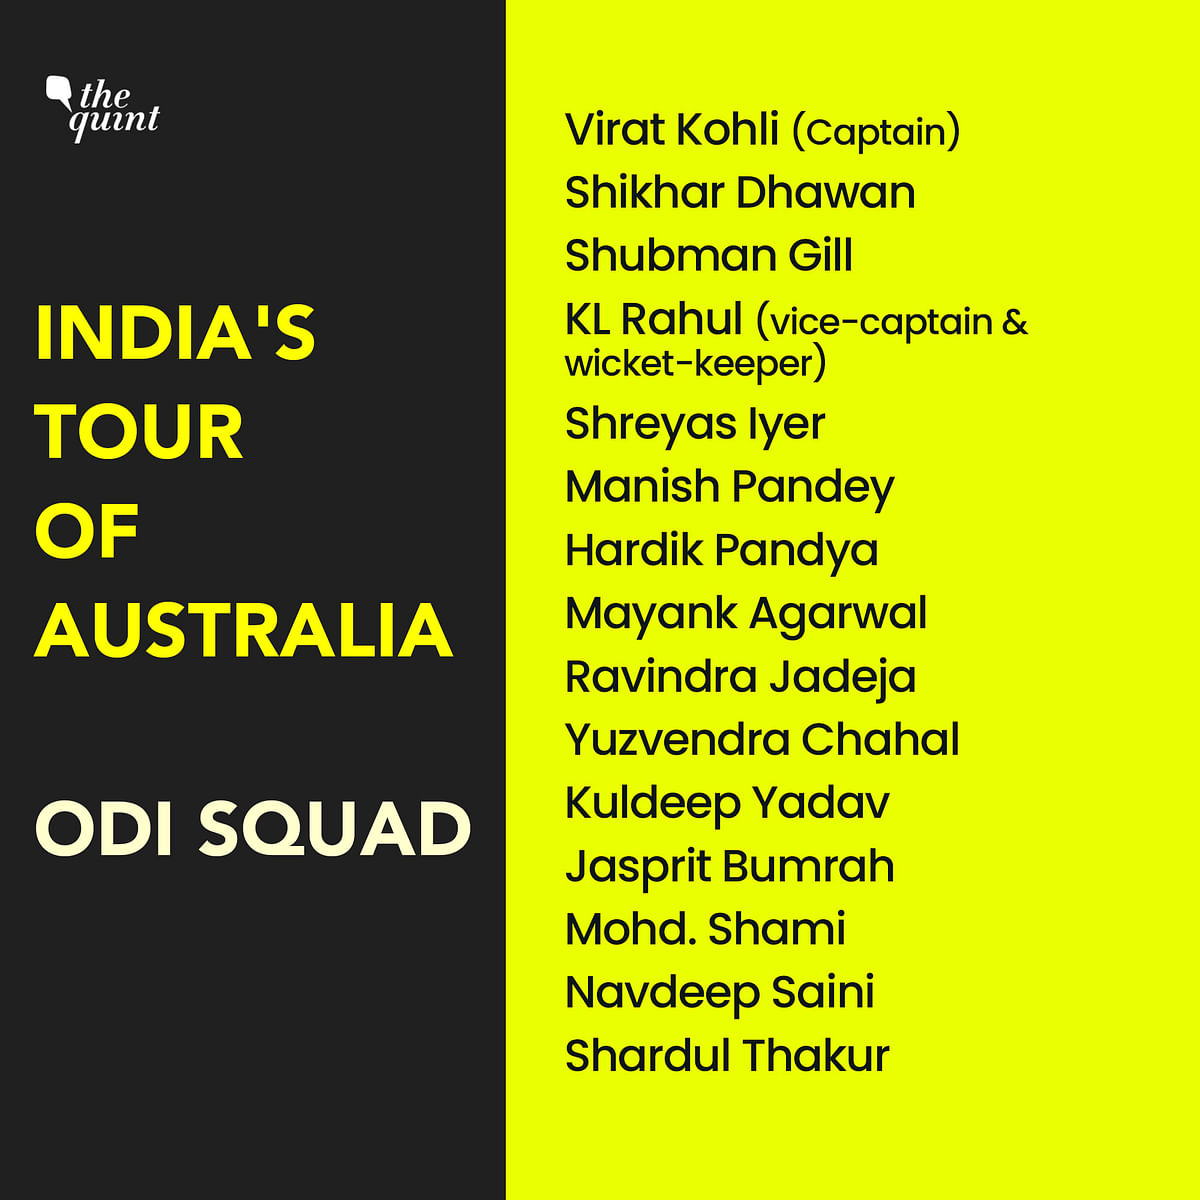 BCCI has announced India’s squad for the upcoming tour of Australia.